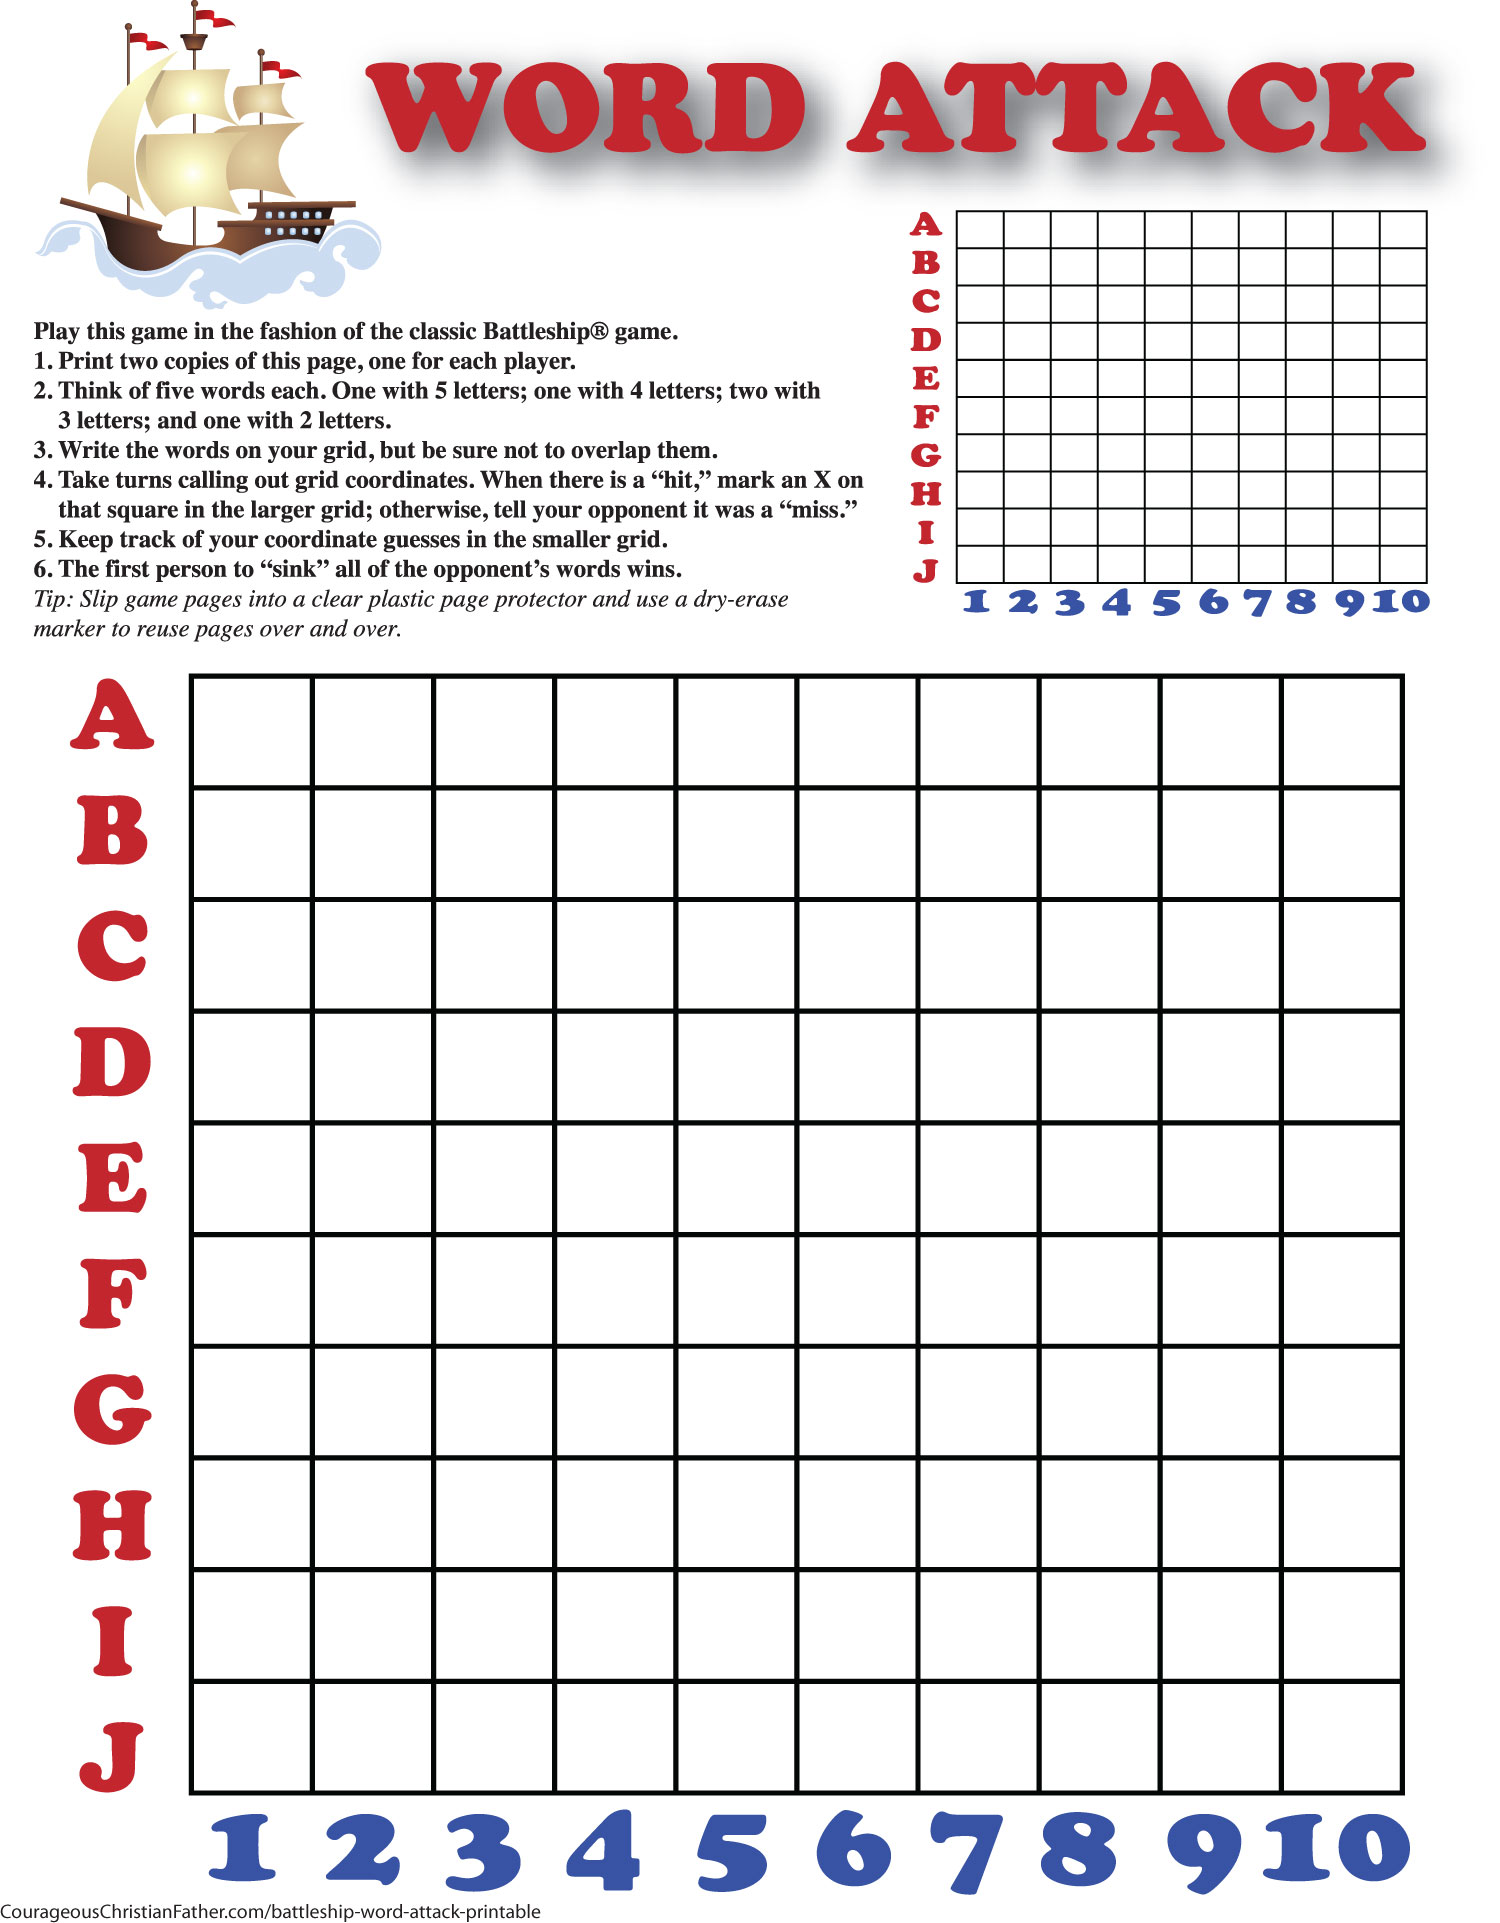 Battleship Word Attack Printable - a Free word attack printable plays like the classic Battleship game.